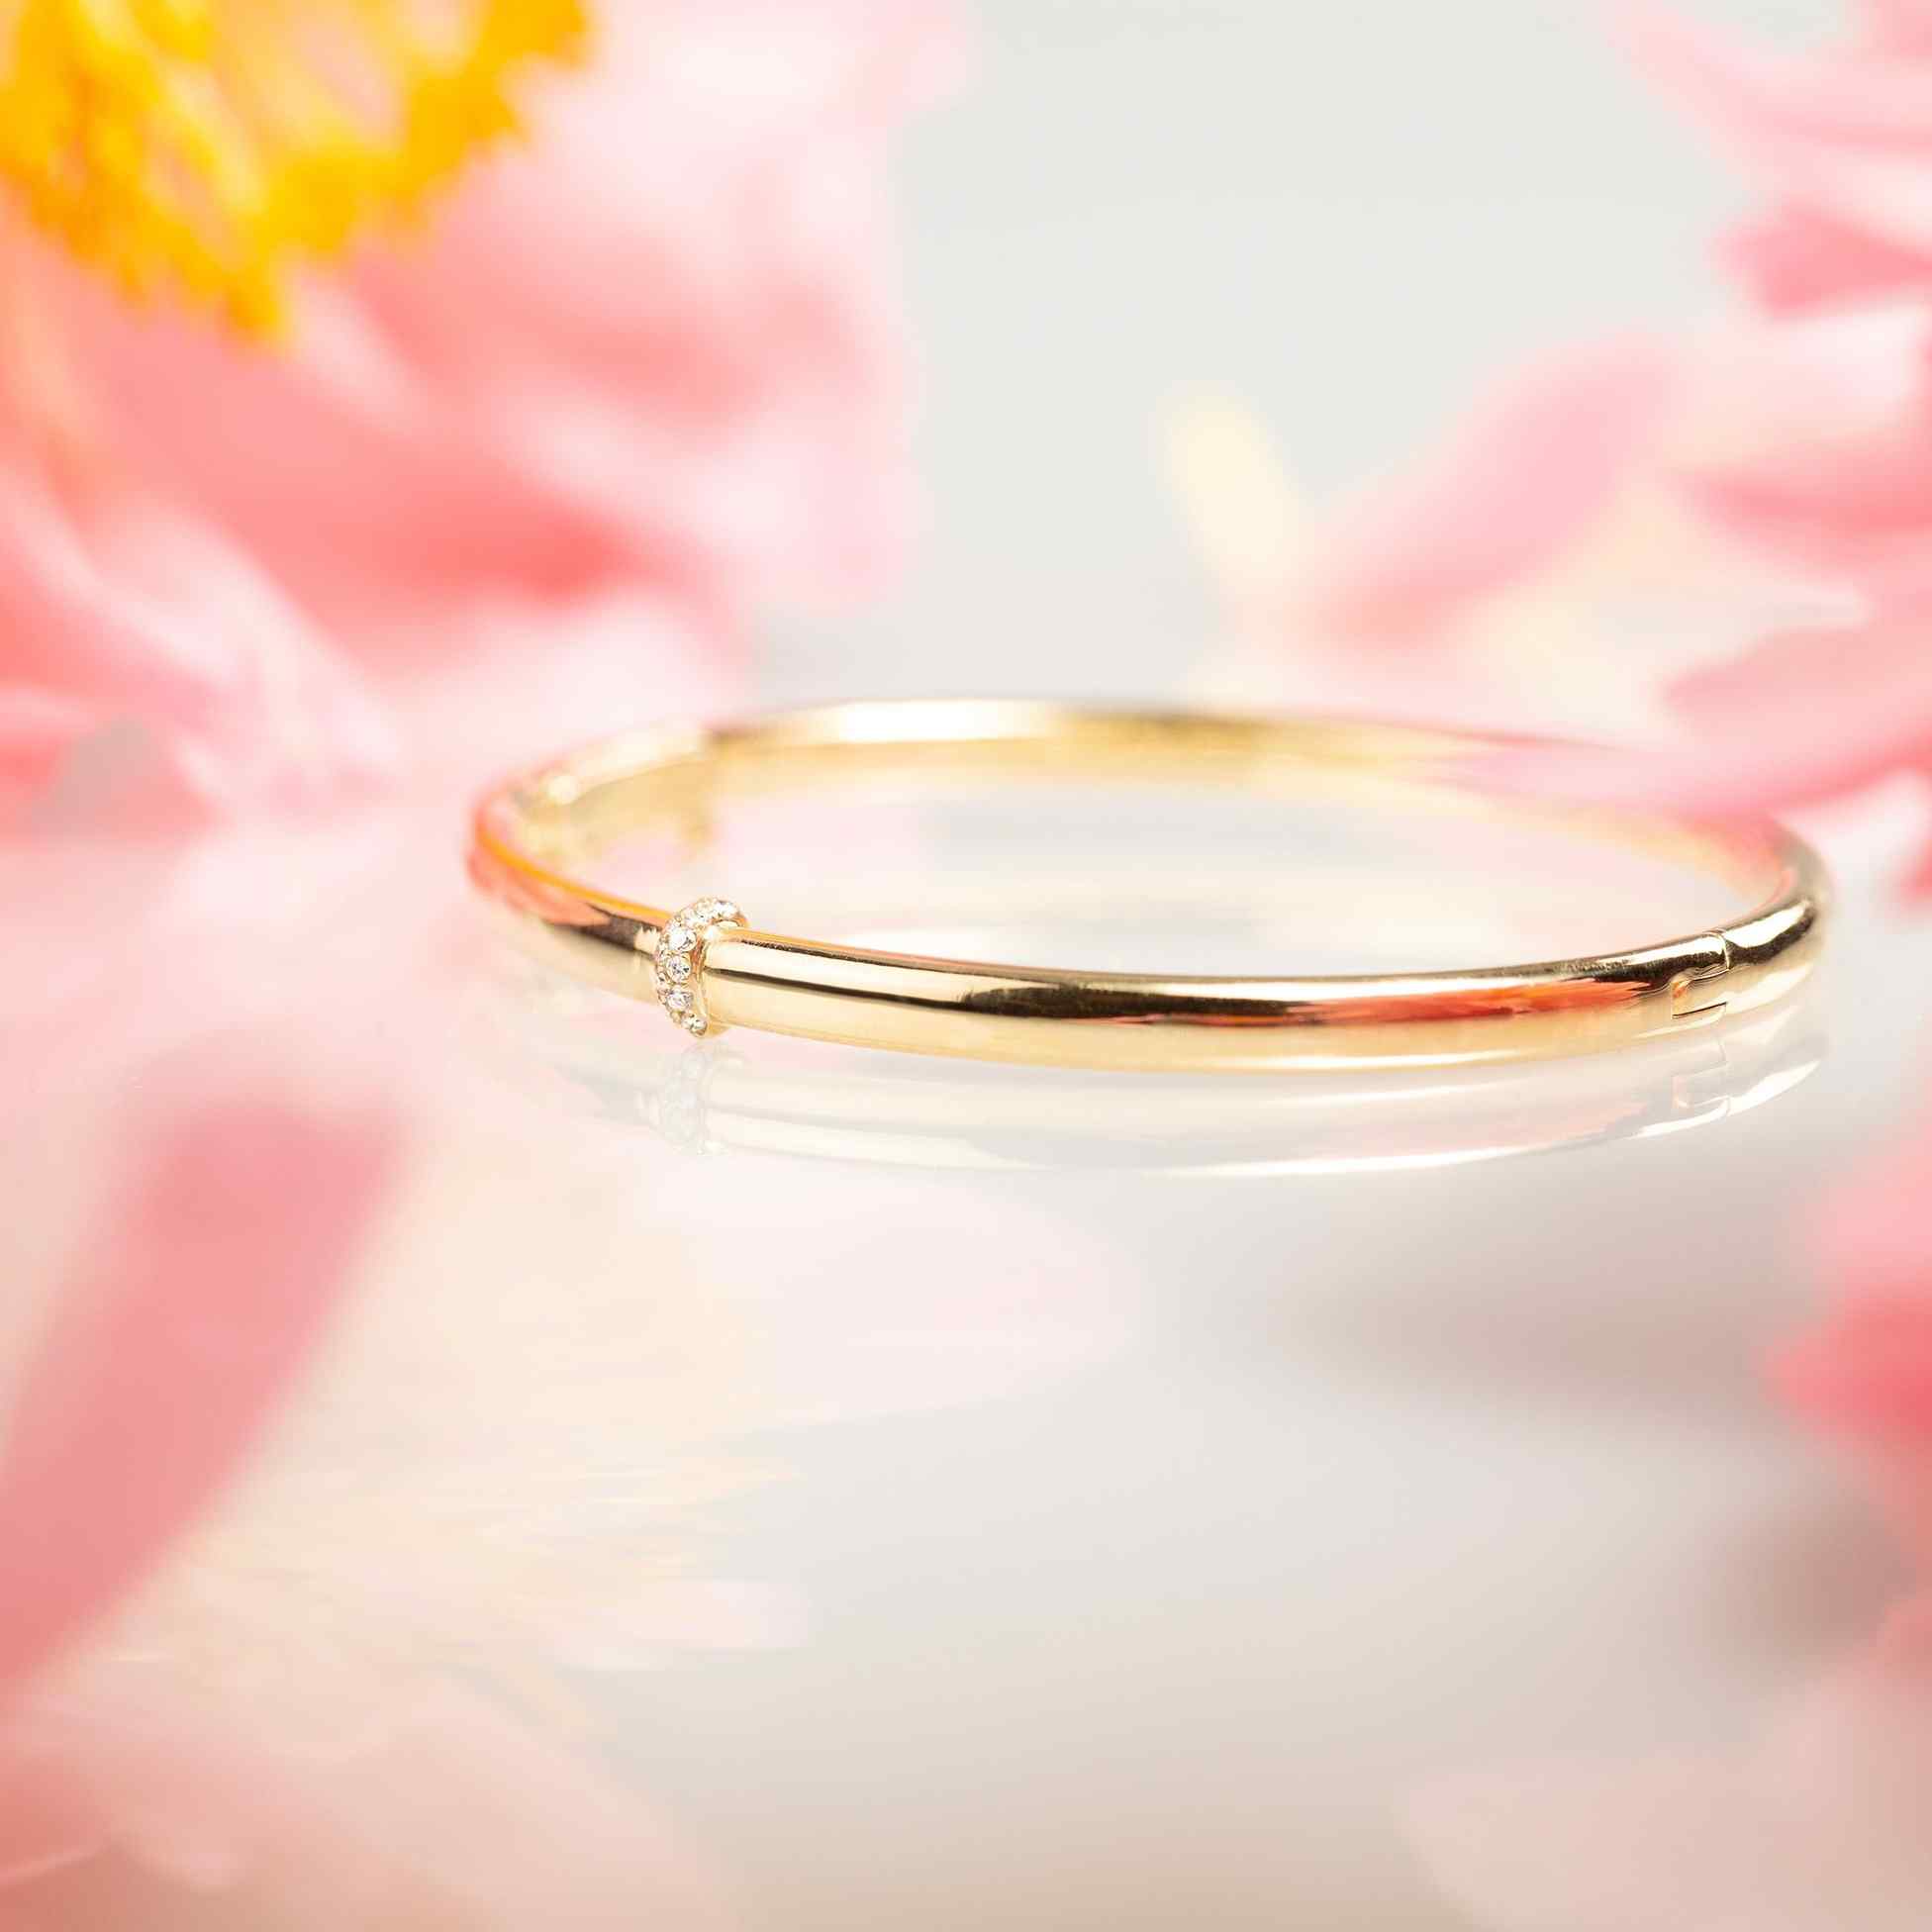 A delicate band of diamonds encircles one point along a 24-gram gold bangle. Our Dalliance Gold bracelet has an inner circumference of 6.3" (16 cm) with a long axis of 2.2" (5.6 cm) and a short axis of 1.8" (4.6 cm). 18k recycled yellow gold shown here. Please reach out to our Atelier to customize the size of the bracelet.